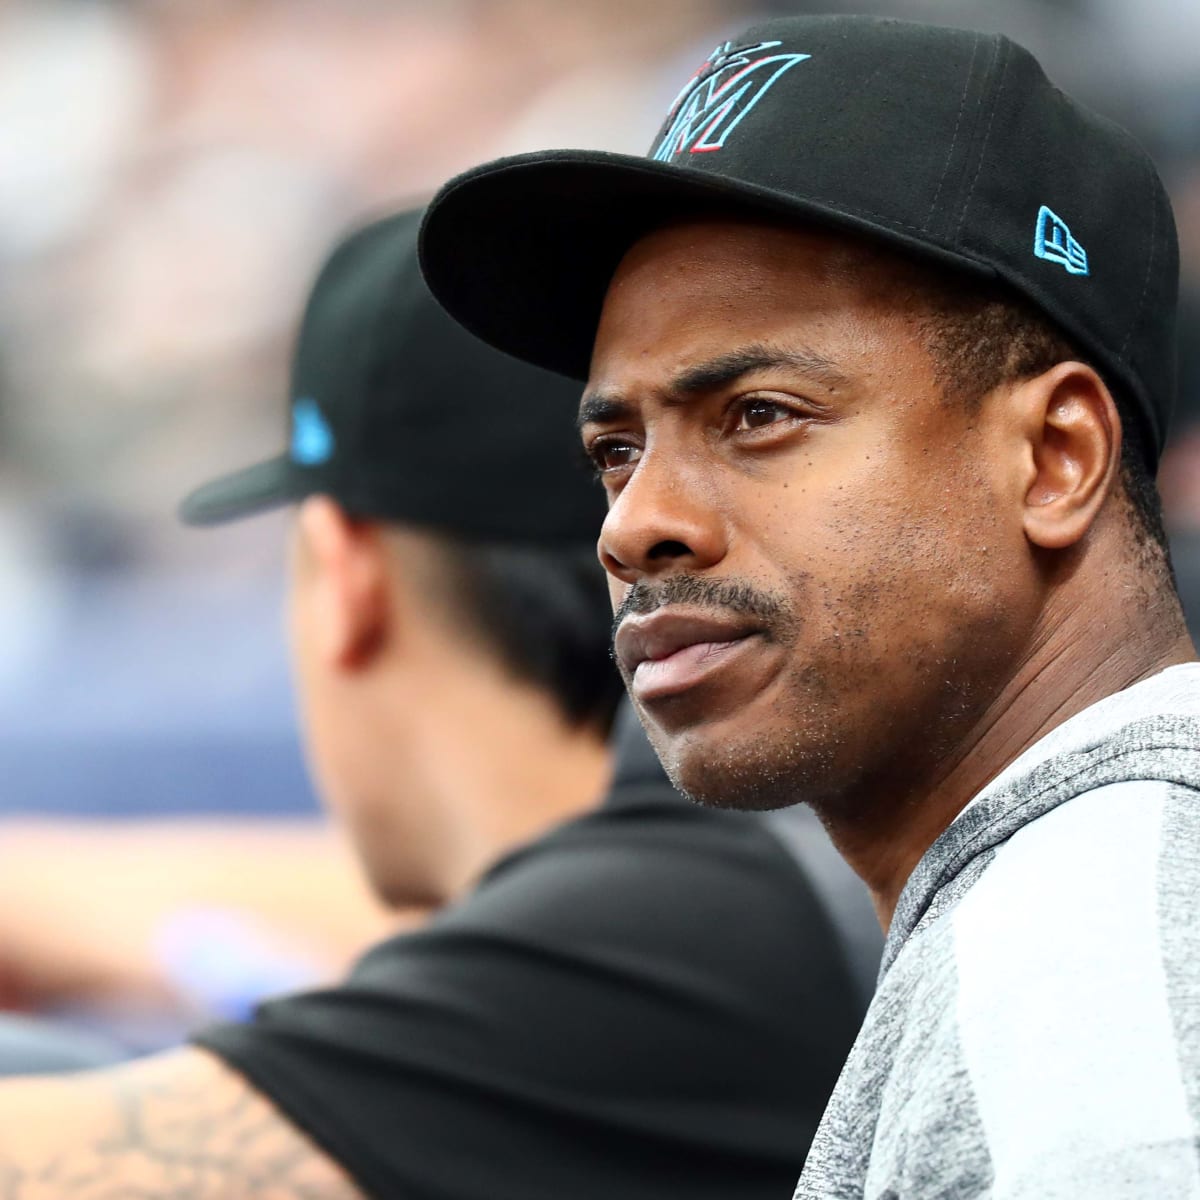 Yankees activate Curtis Granderson from DL - NBC Sports